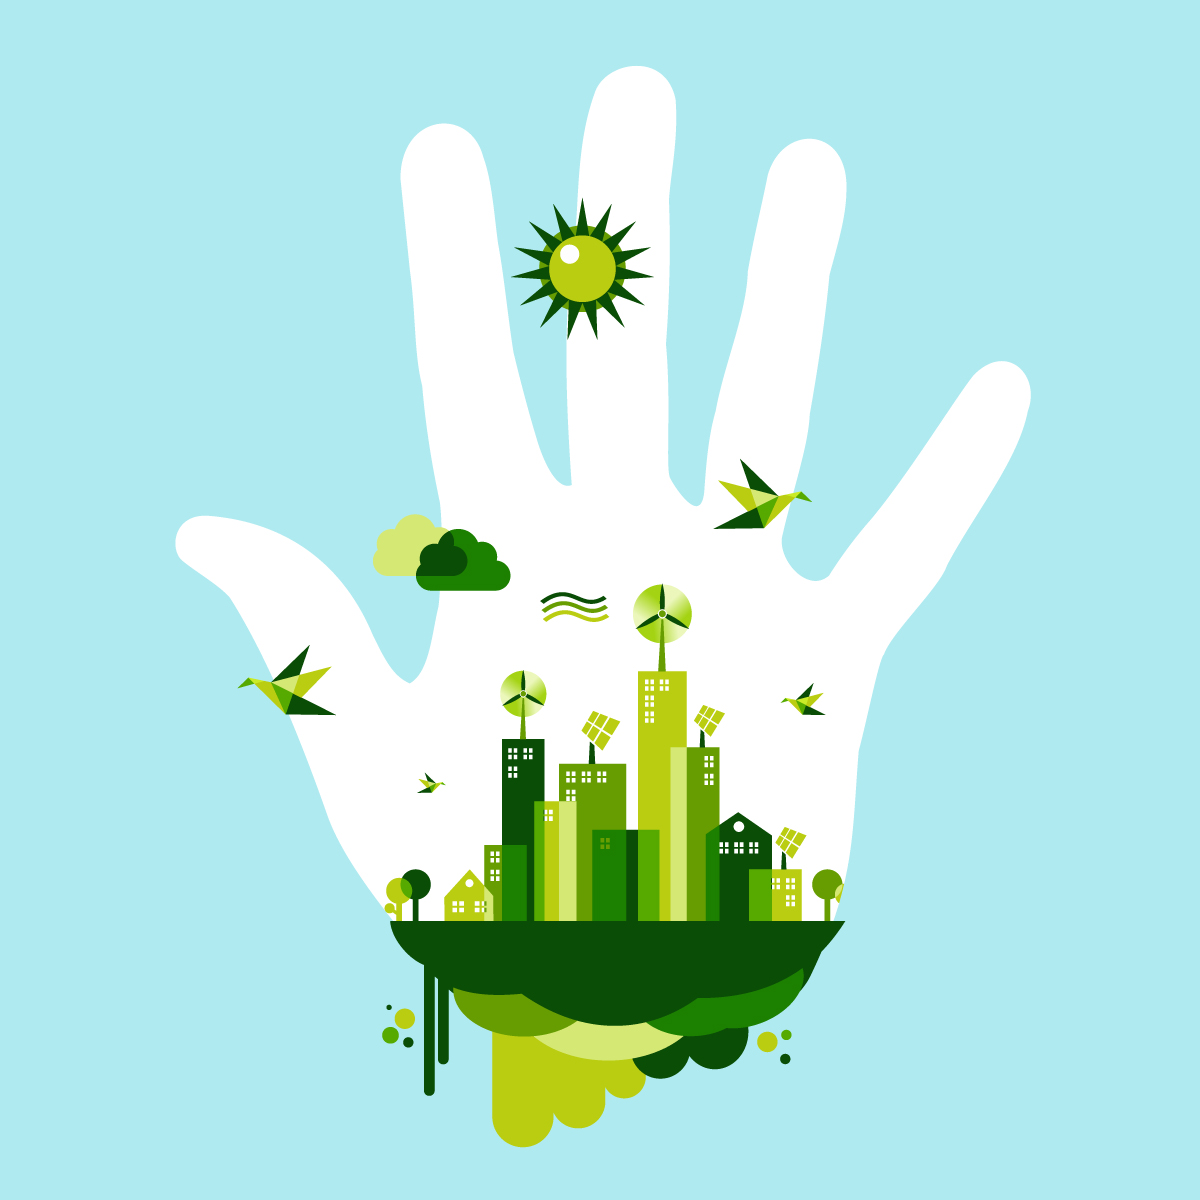 Most Common Misconceptions of Corporations towards Sustainability